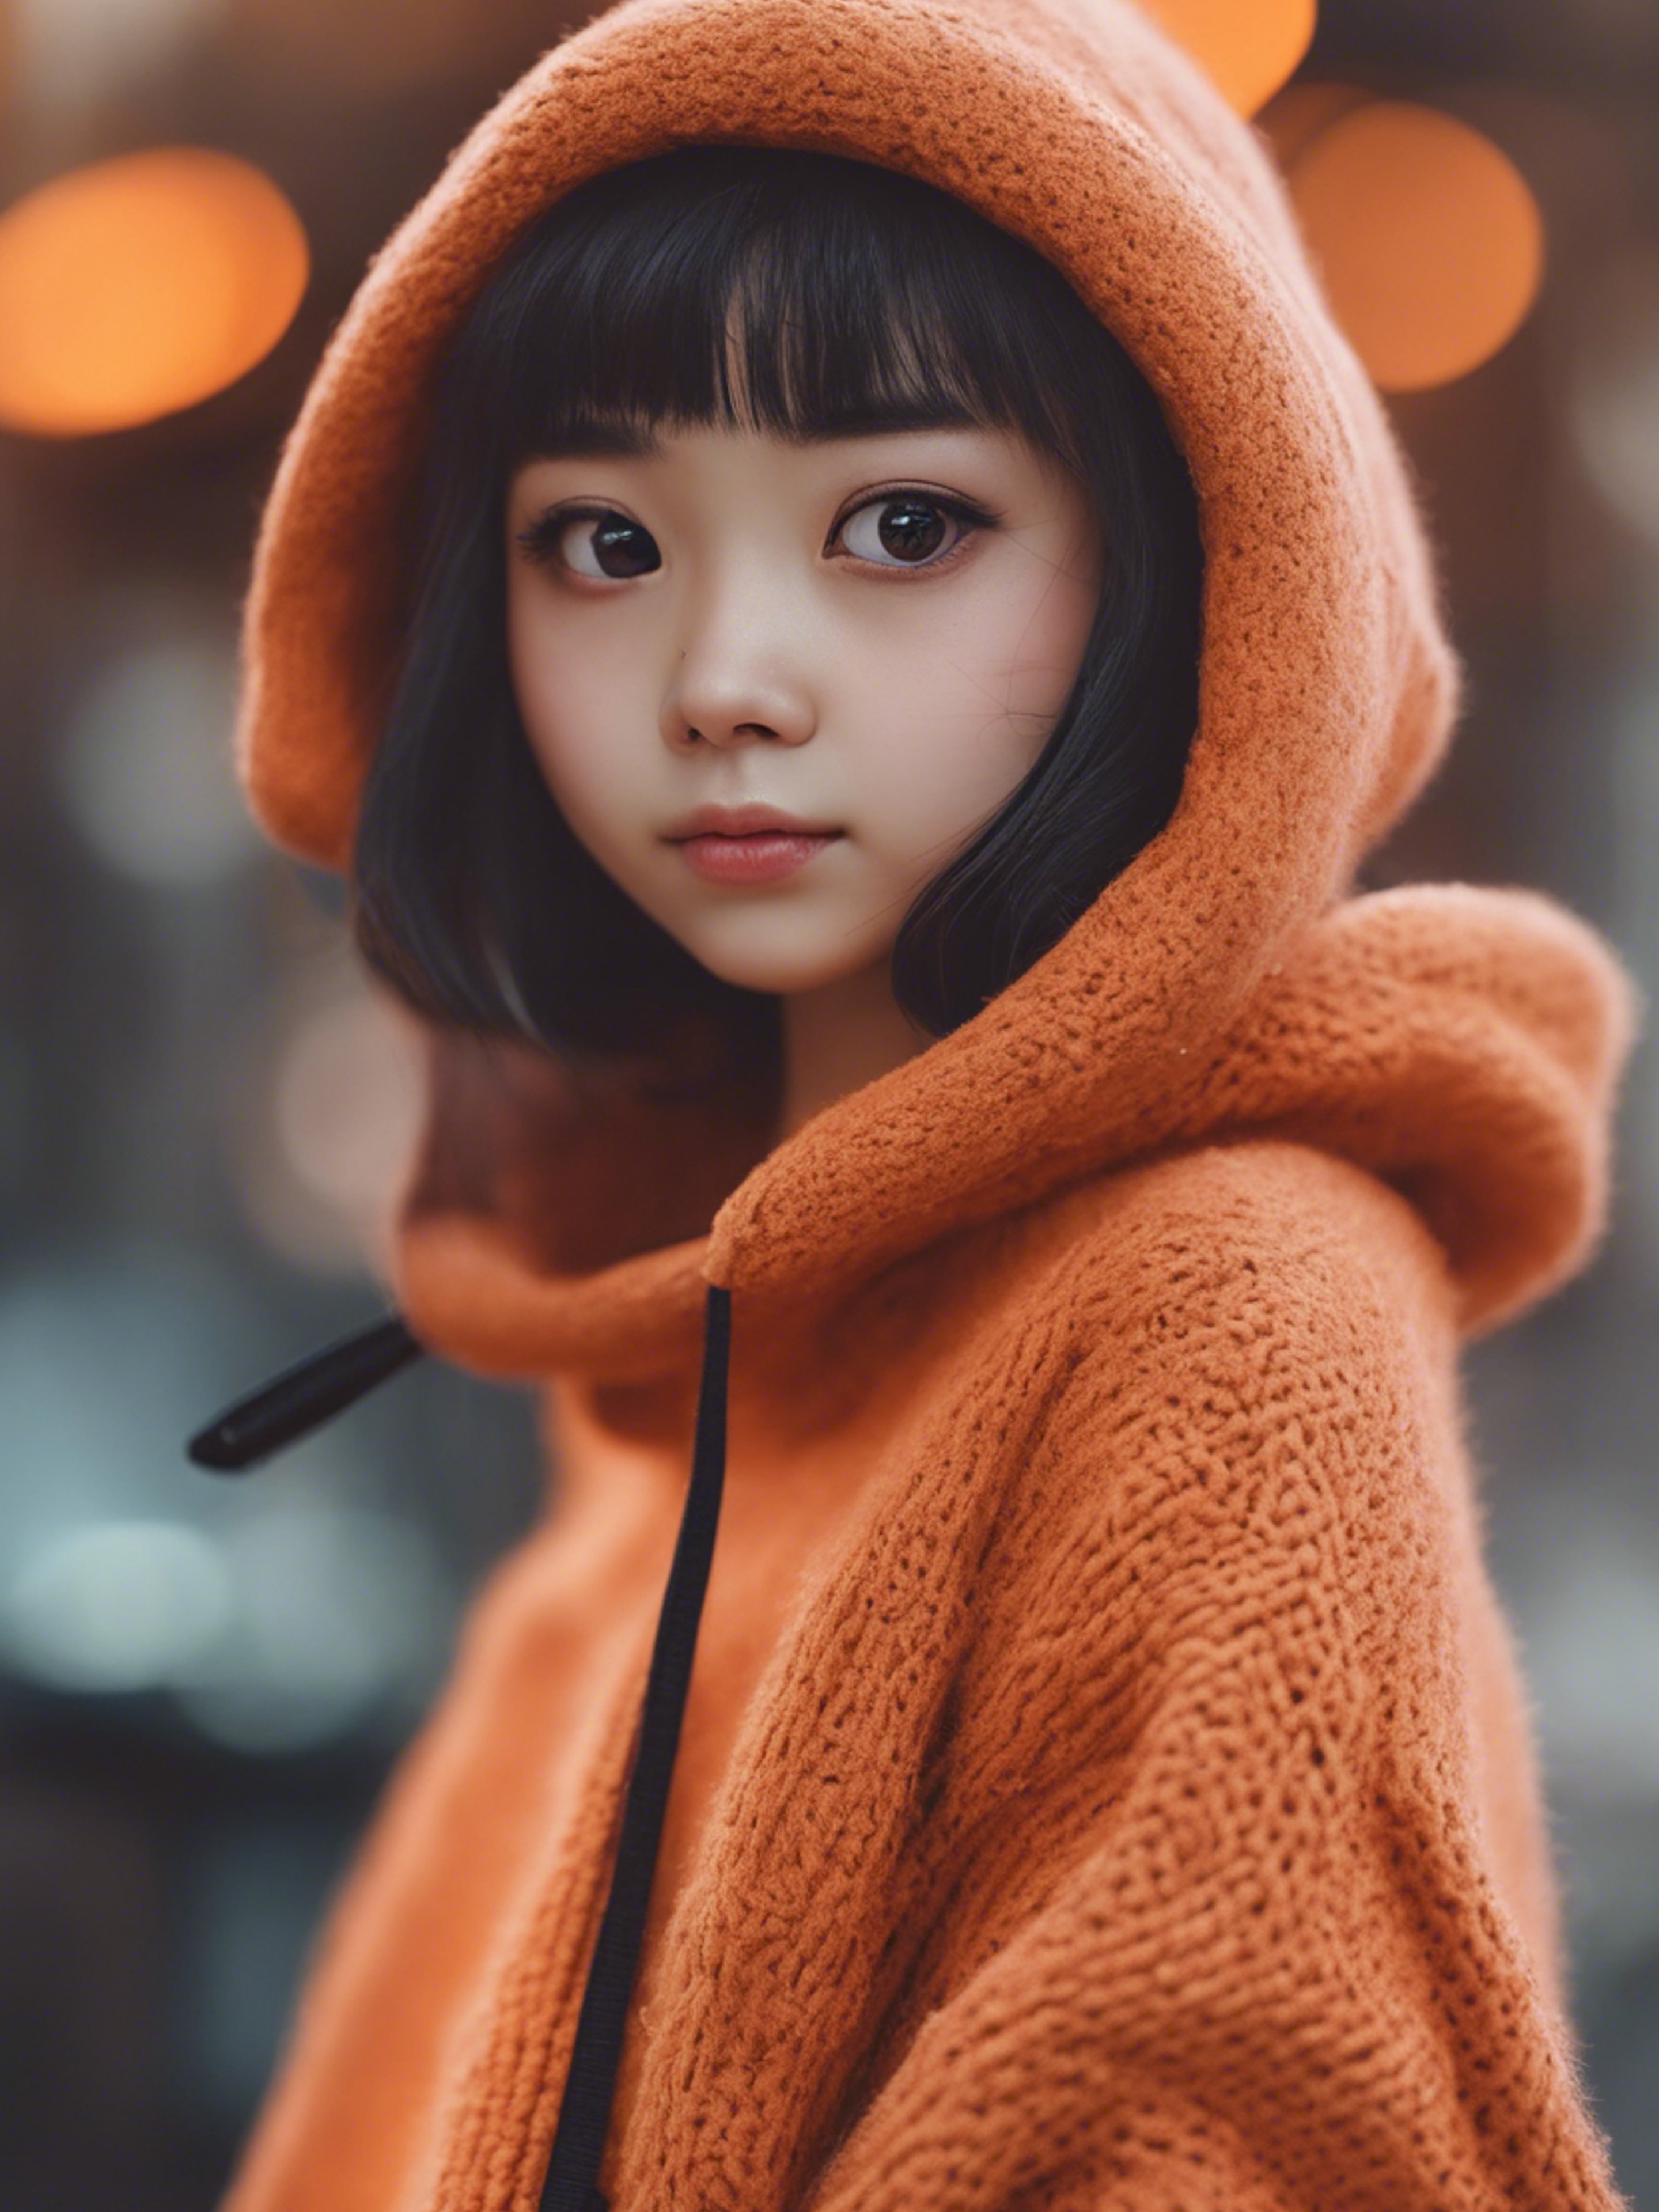 A cute, kawaii character wearing an oversized orange-colored sweater. Wallpaper[f1c76bc0bc724a70a2a3]